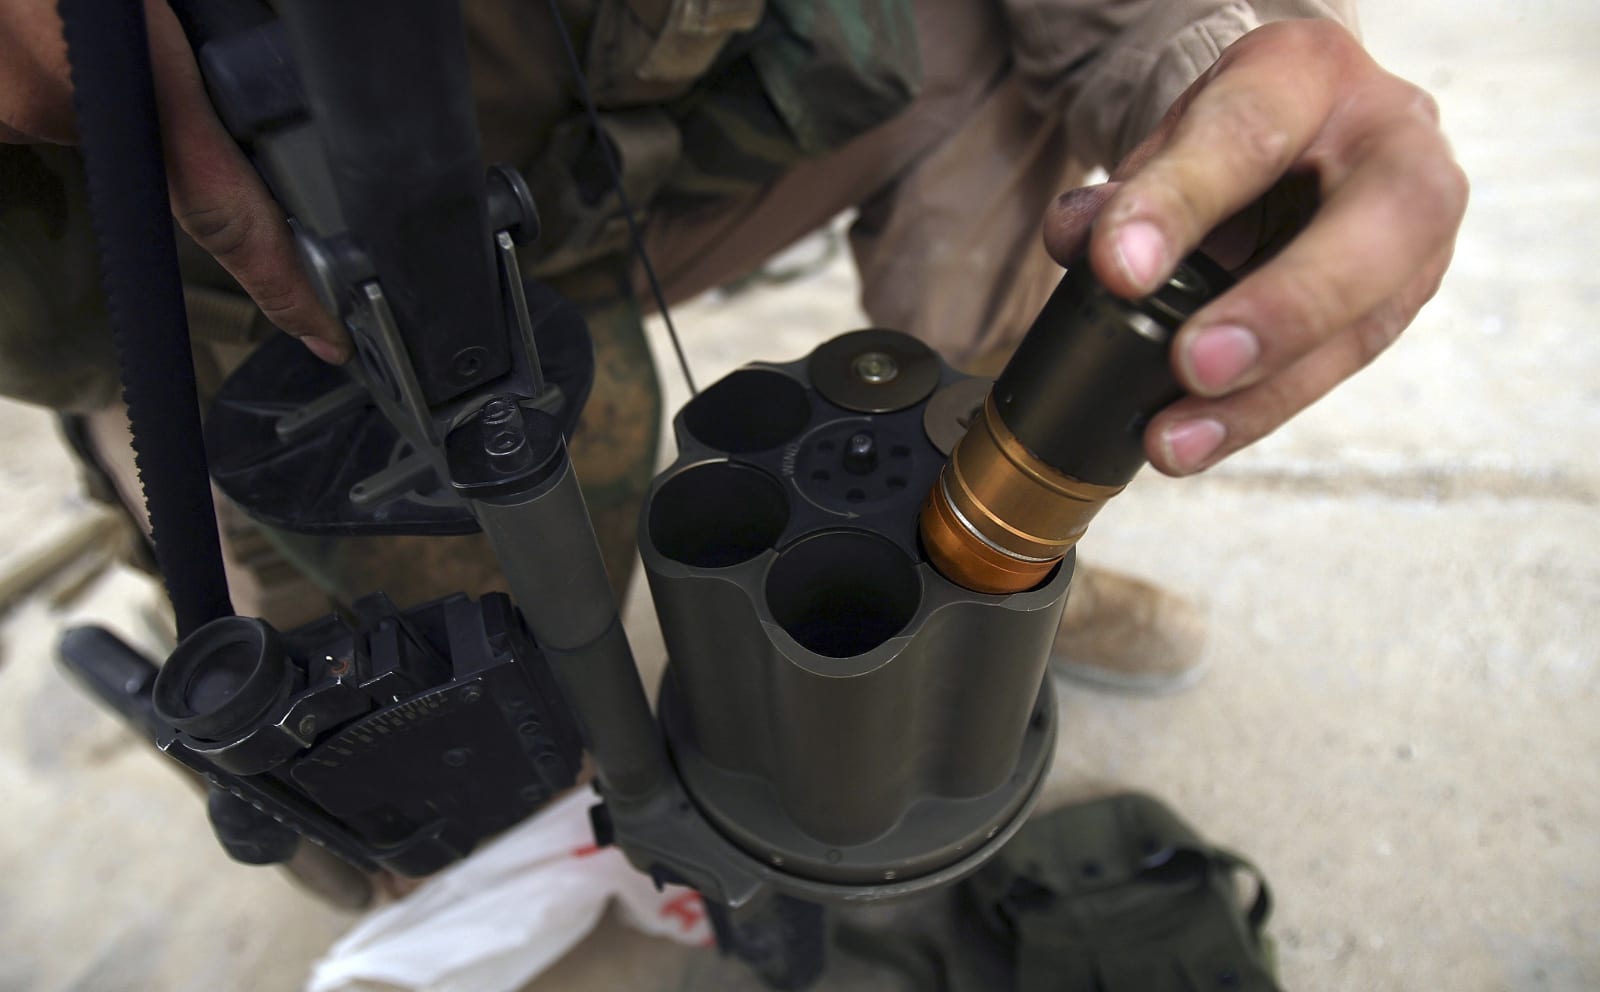 A Marine from 1st Battalion, 24th Marine Regiment loads 40 mm grenades during a training exercise at Camp Fallujah's Eagle Range